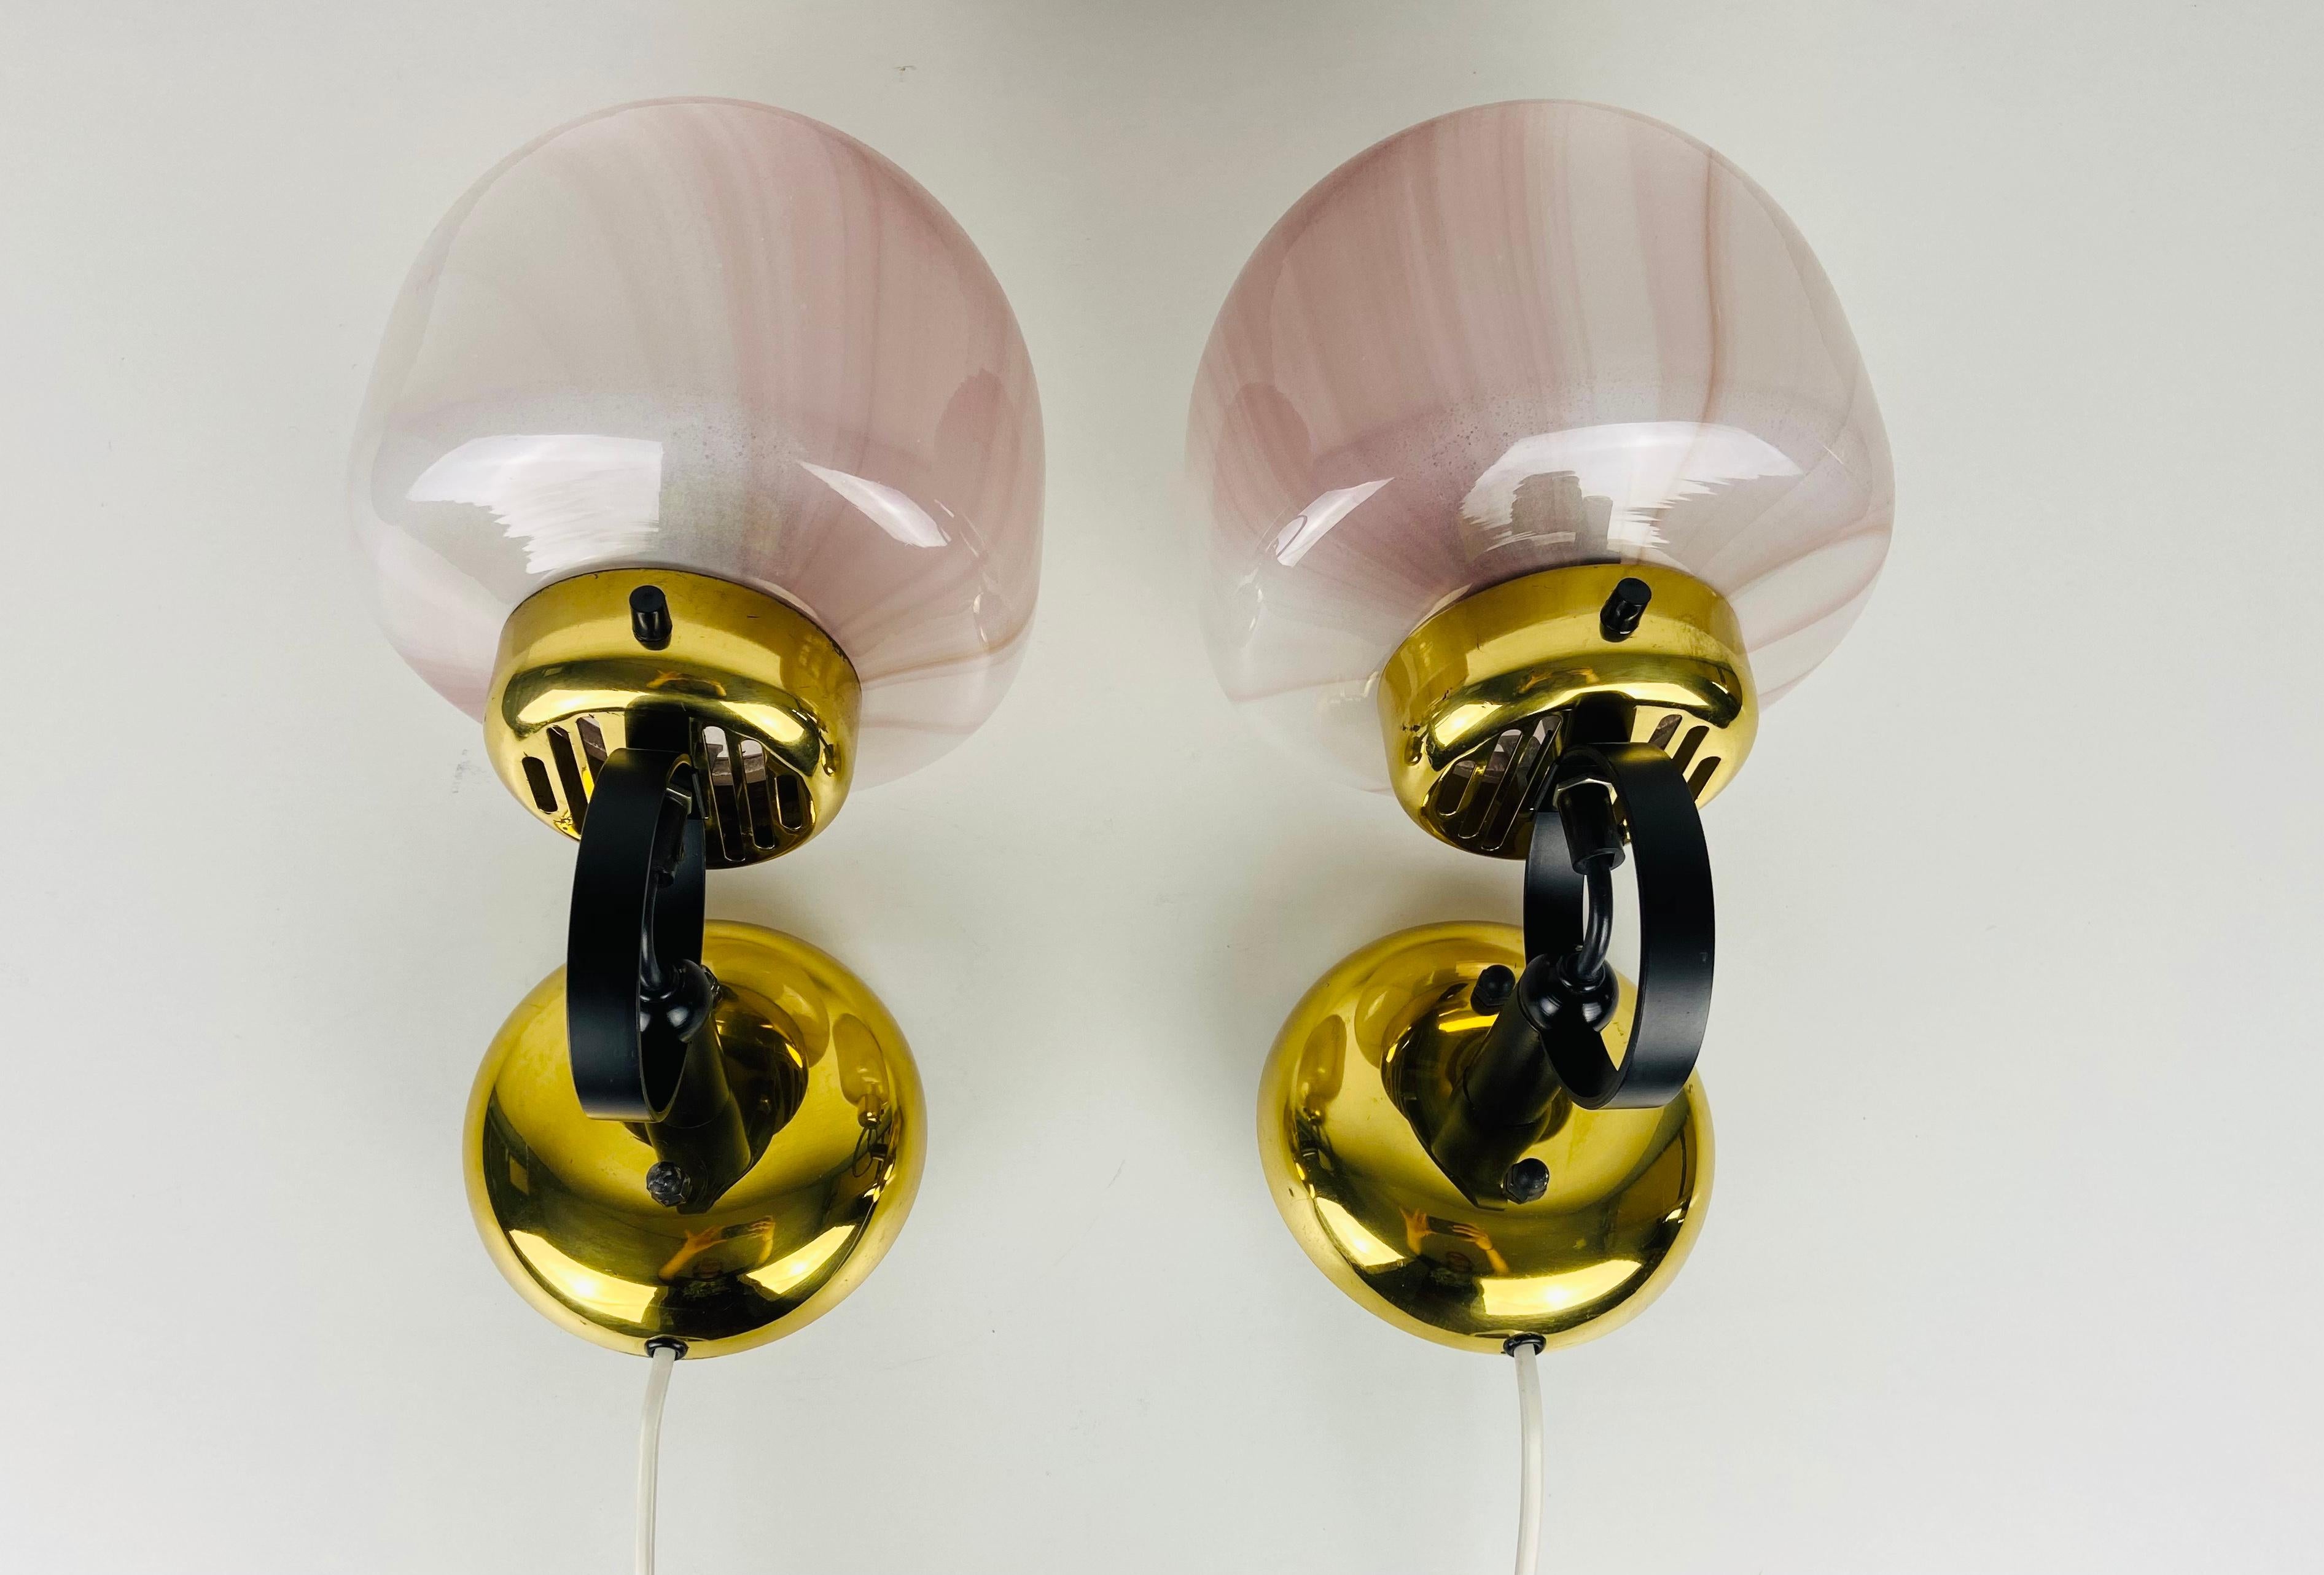 Peill & Putzler sconces made in Germany in the 1970s. White and pink opaque glass with brass elements. The lamps are in a very good condition.

The lights require E14 light bulbs. Works with both 120/220V. 

Free worldwide shipping.